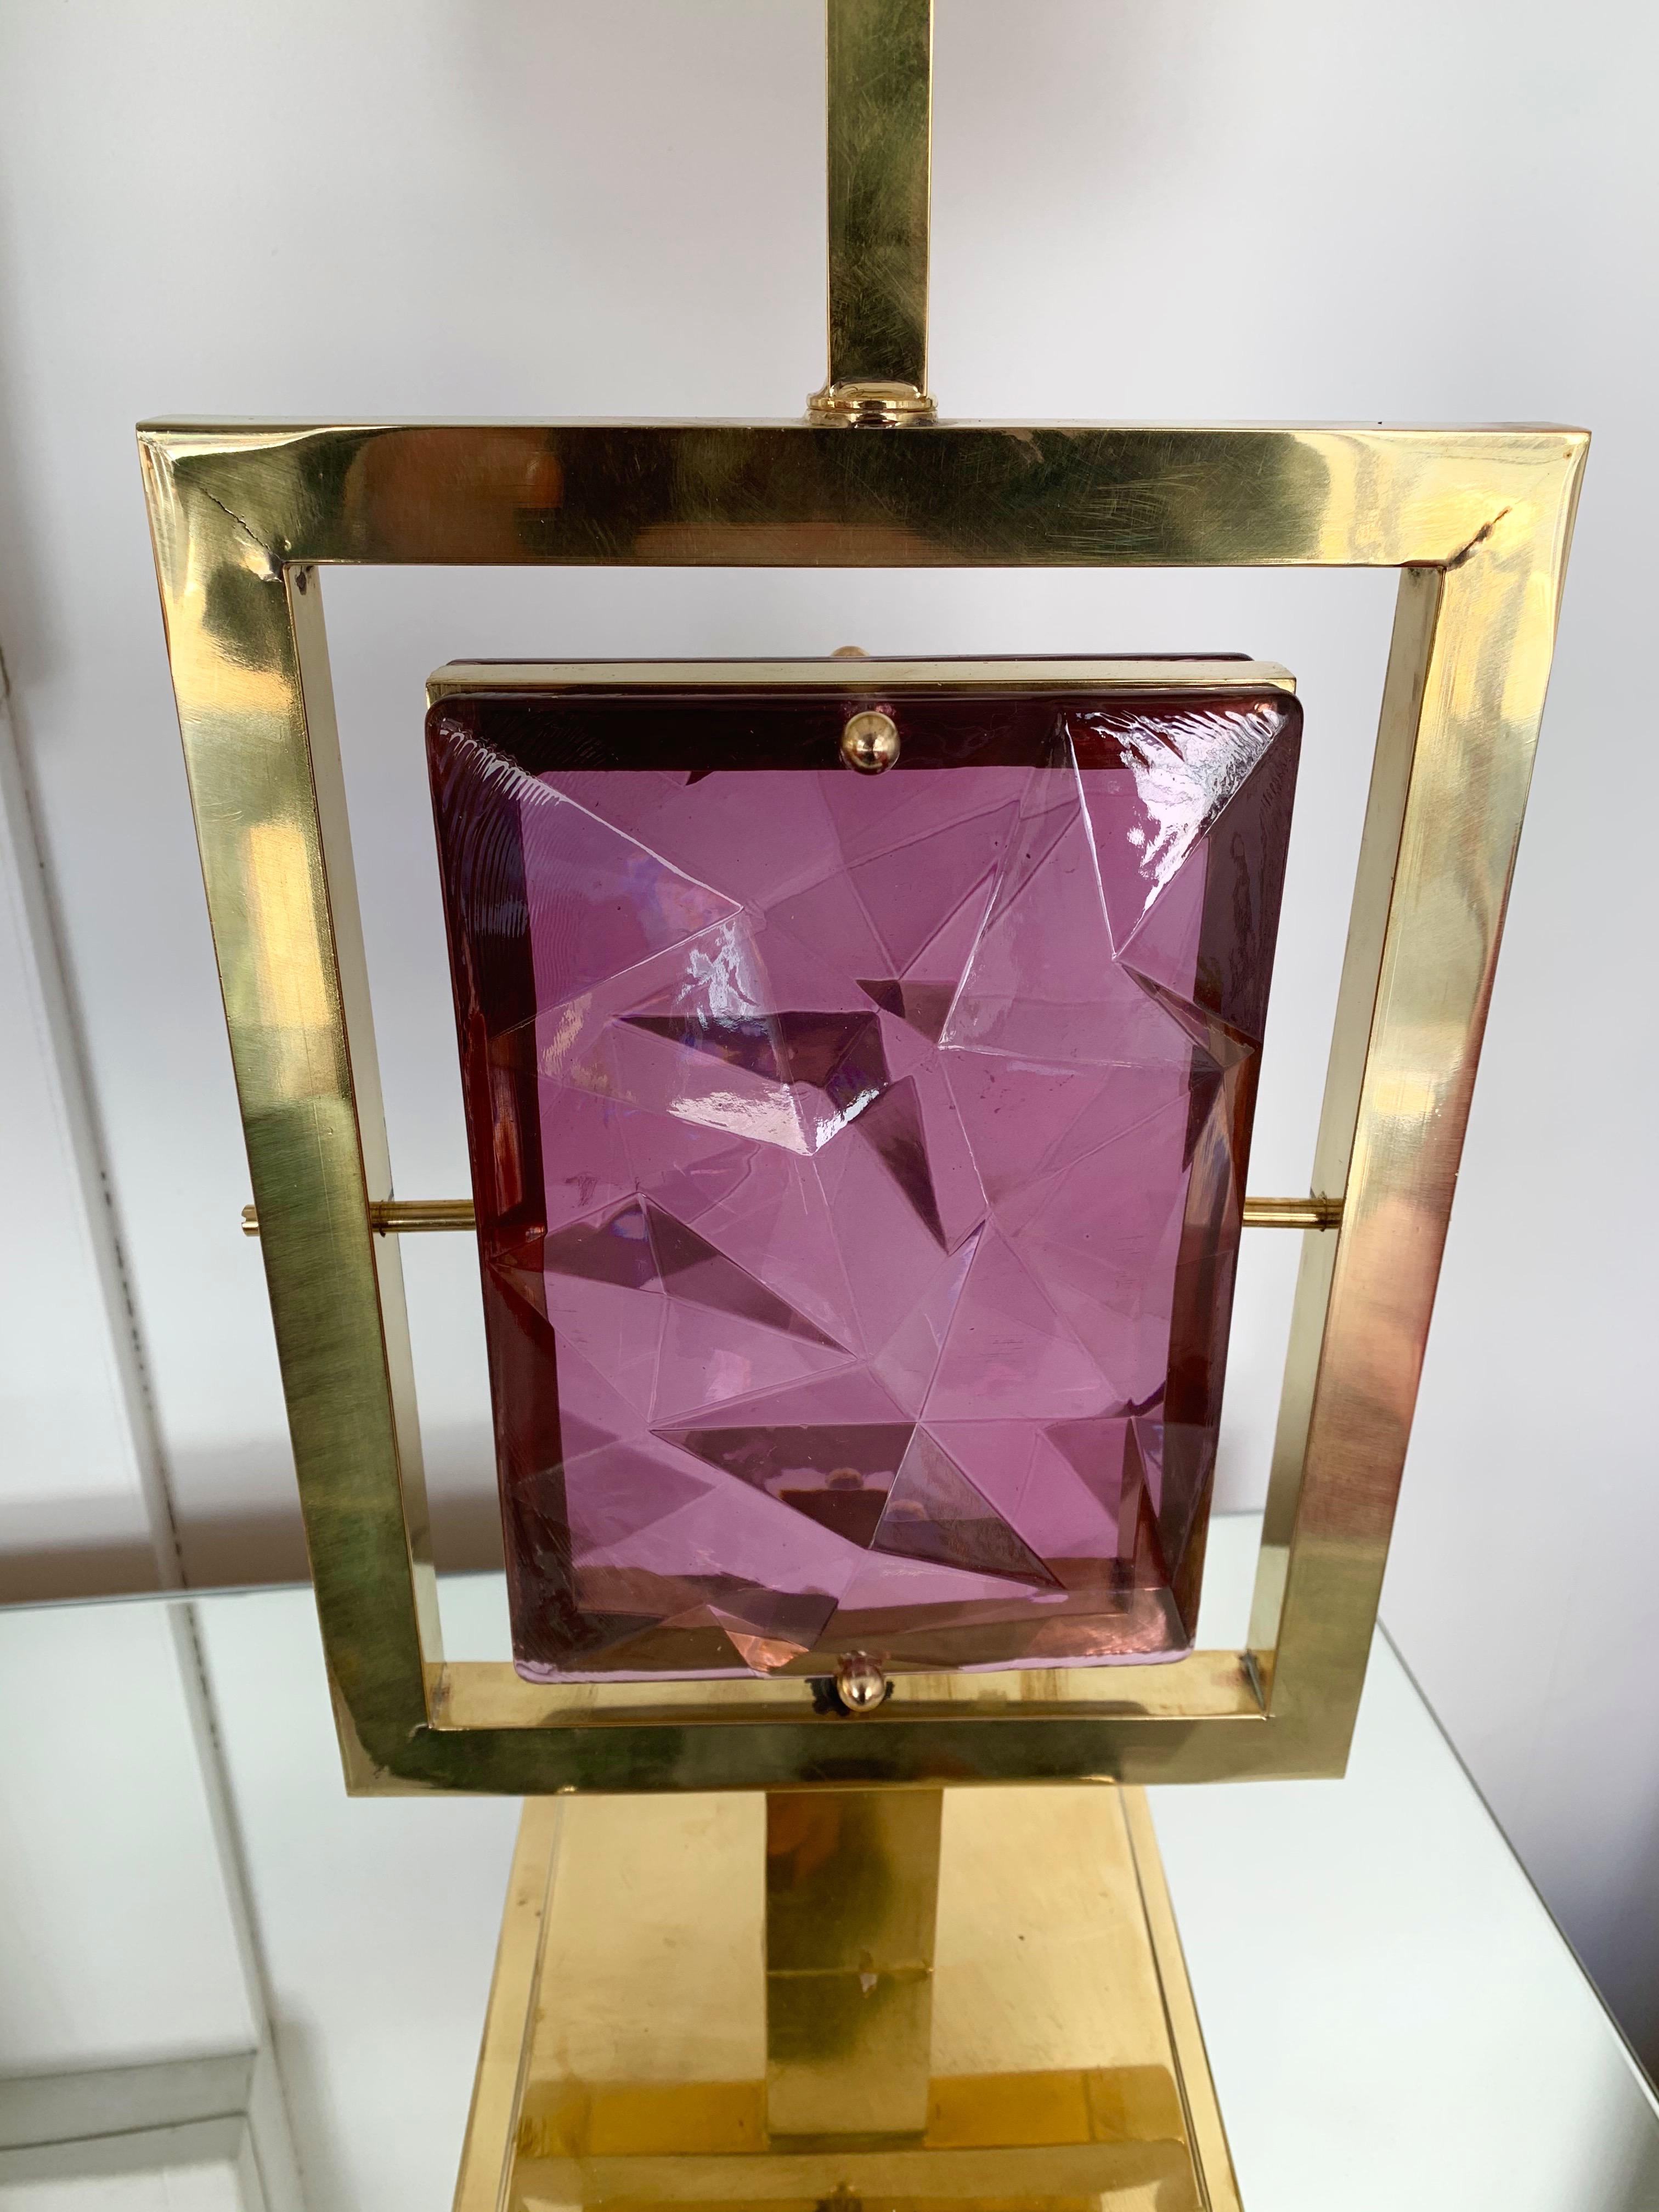 Pair of brass and faceted amethyst Murano glass table lamps. Contemporary work small Italian worshop. 

Measurements indicated without shades

To note: demonstration shades not included.